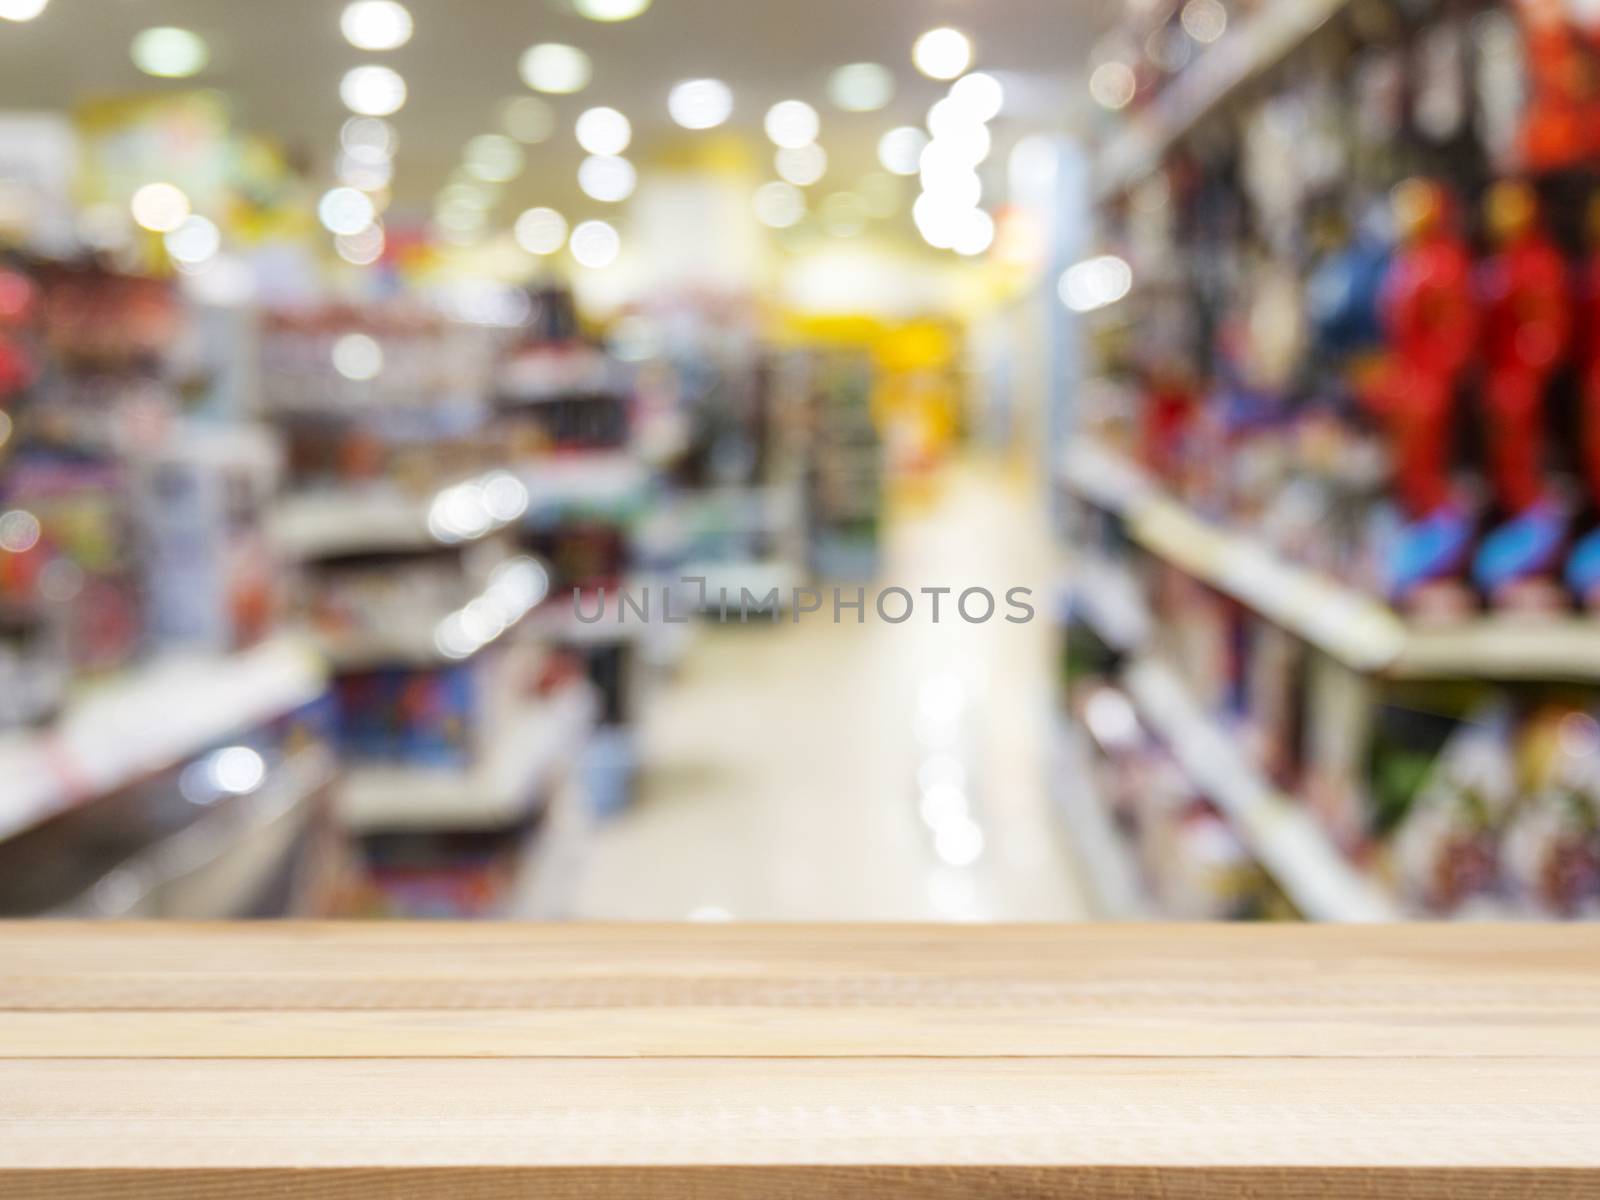 Wooden board empty table in front of blurred background. Perspective light wood over blur in kids toys store - can be used for display or montage your products. Mock up for display of product.